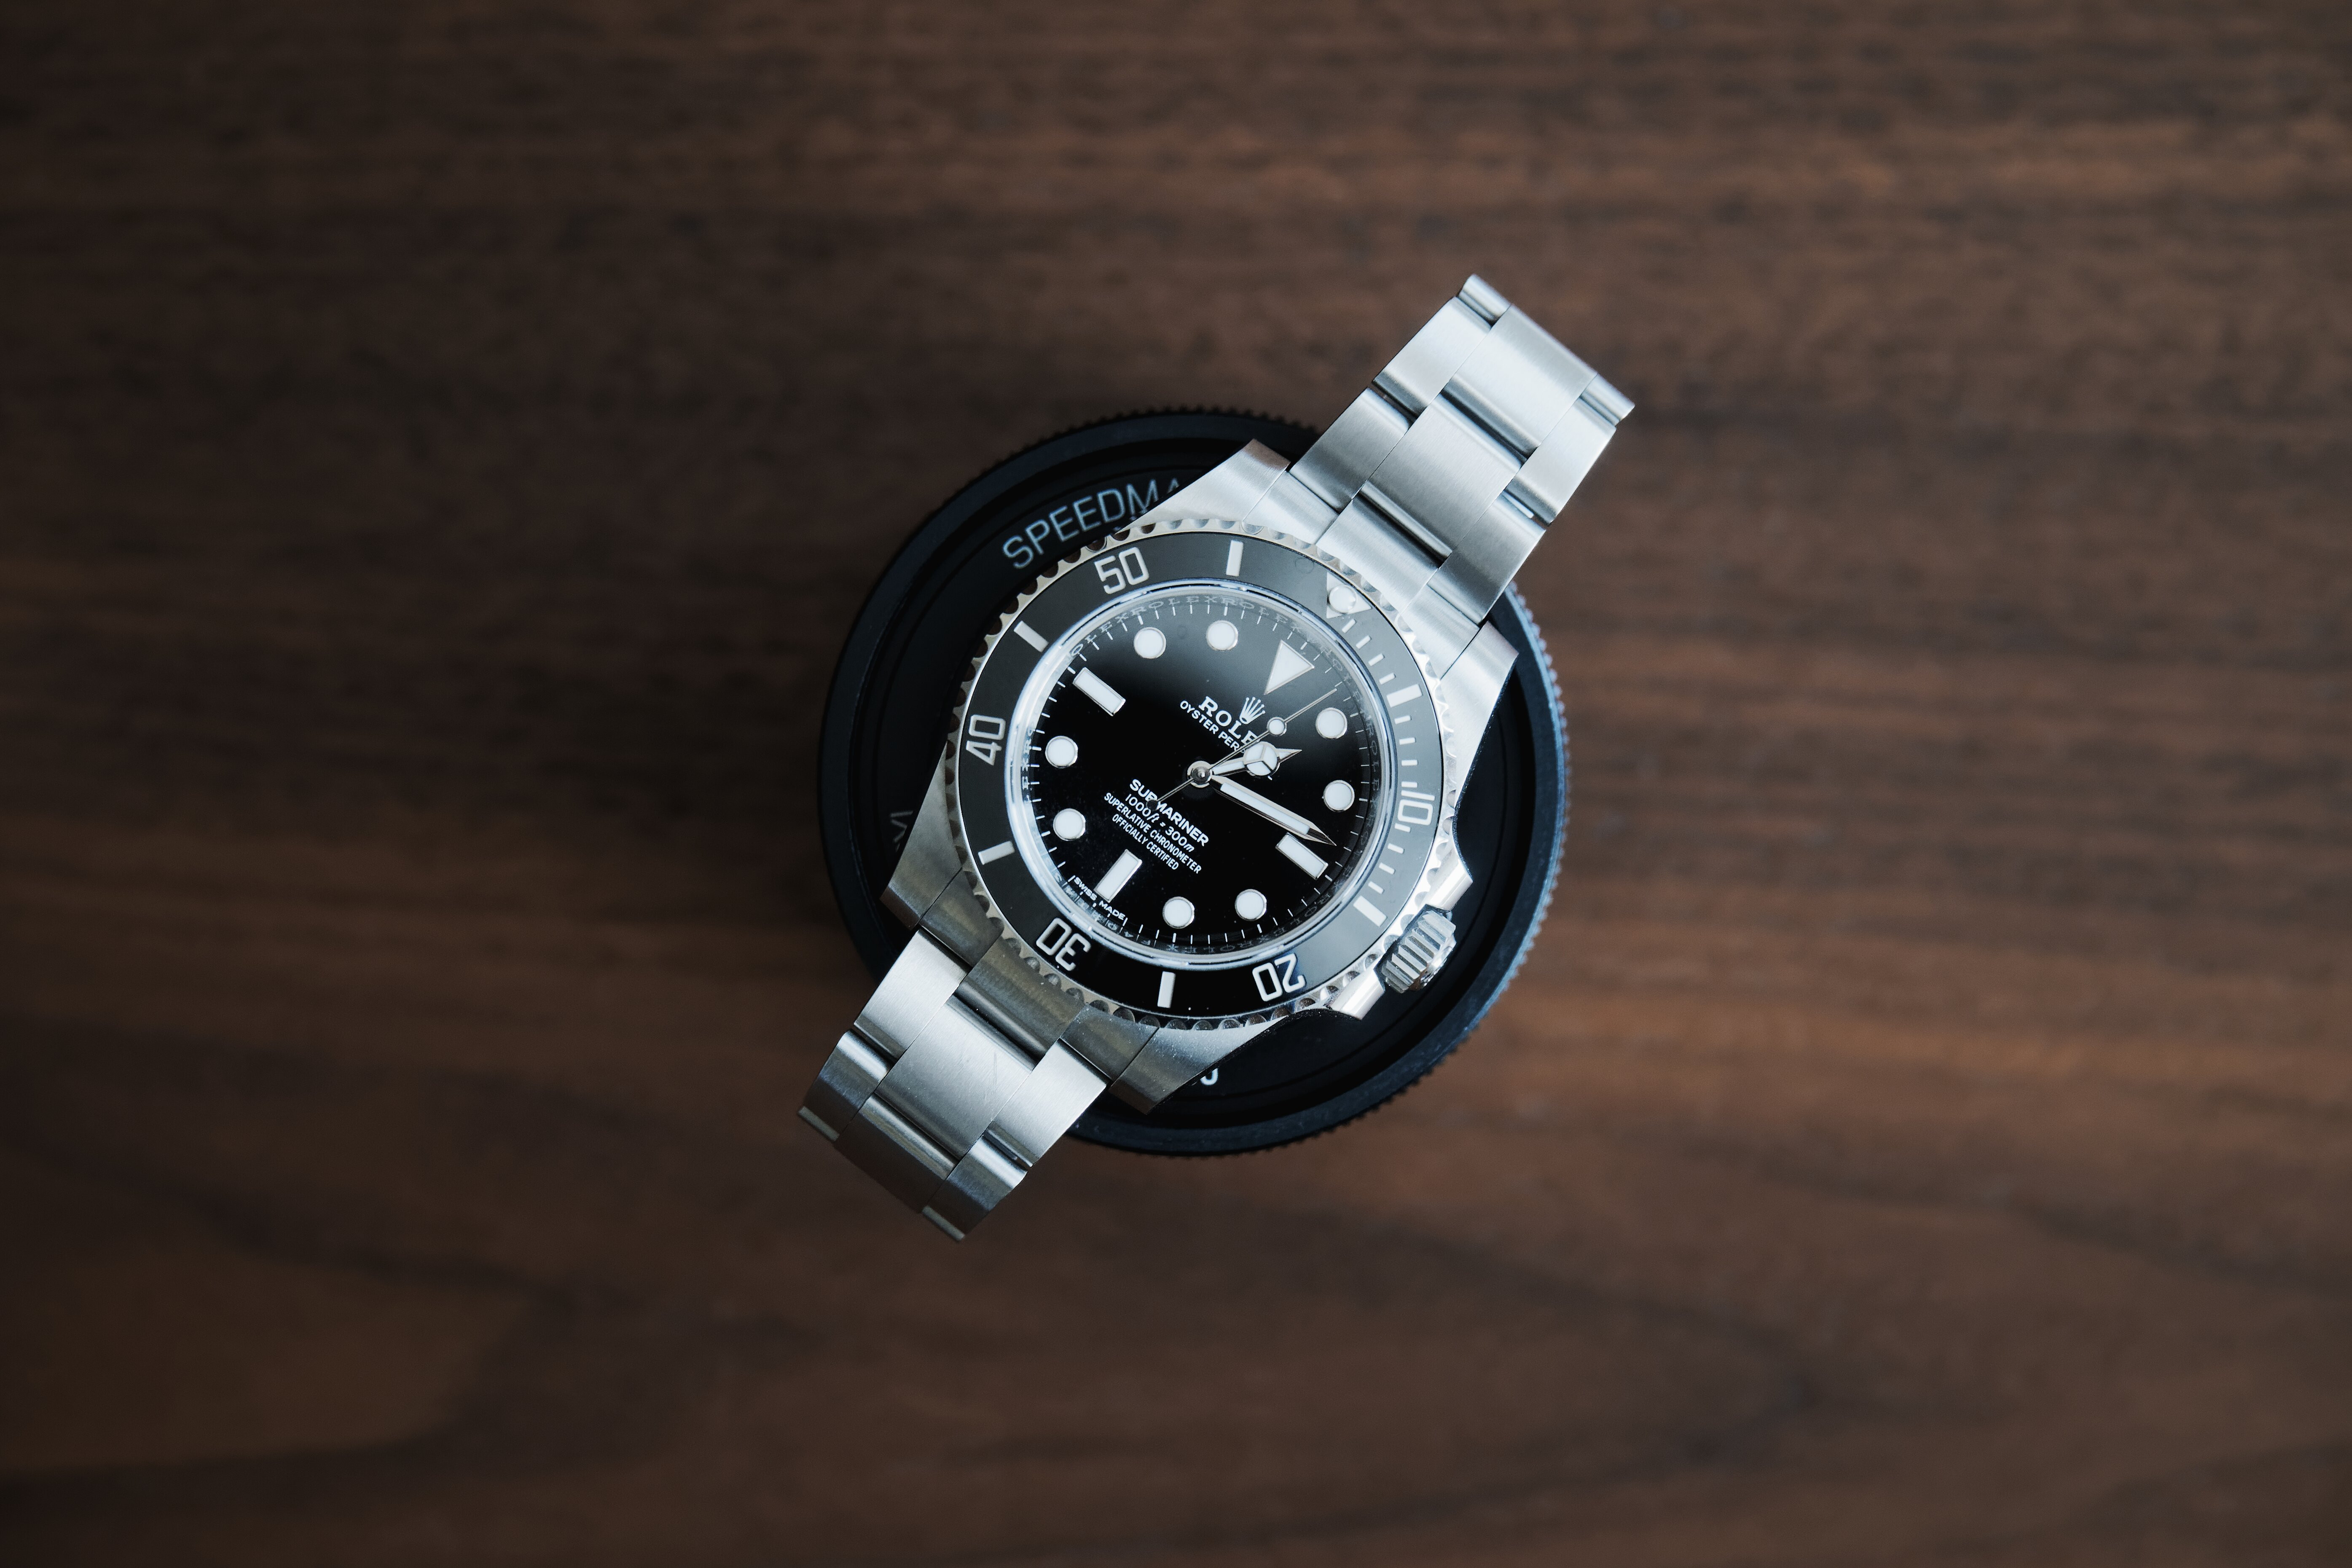 TRR Top 5: Watches With The Best Resale Value (Rolex & More)